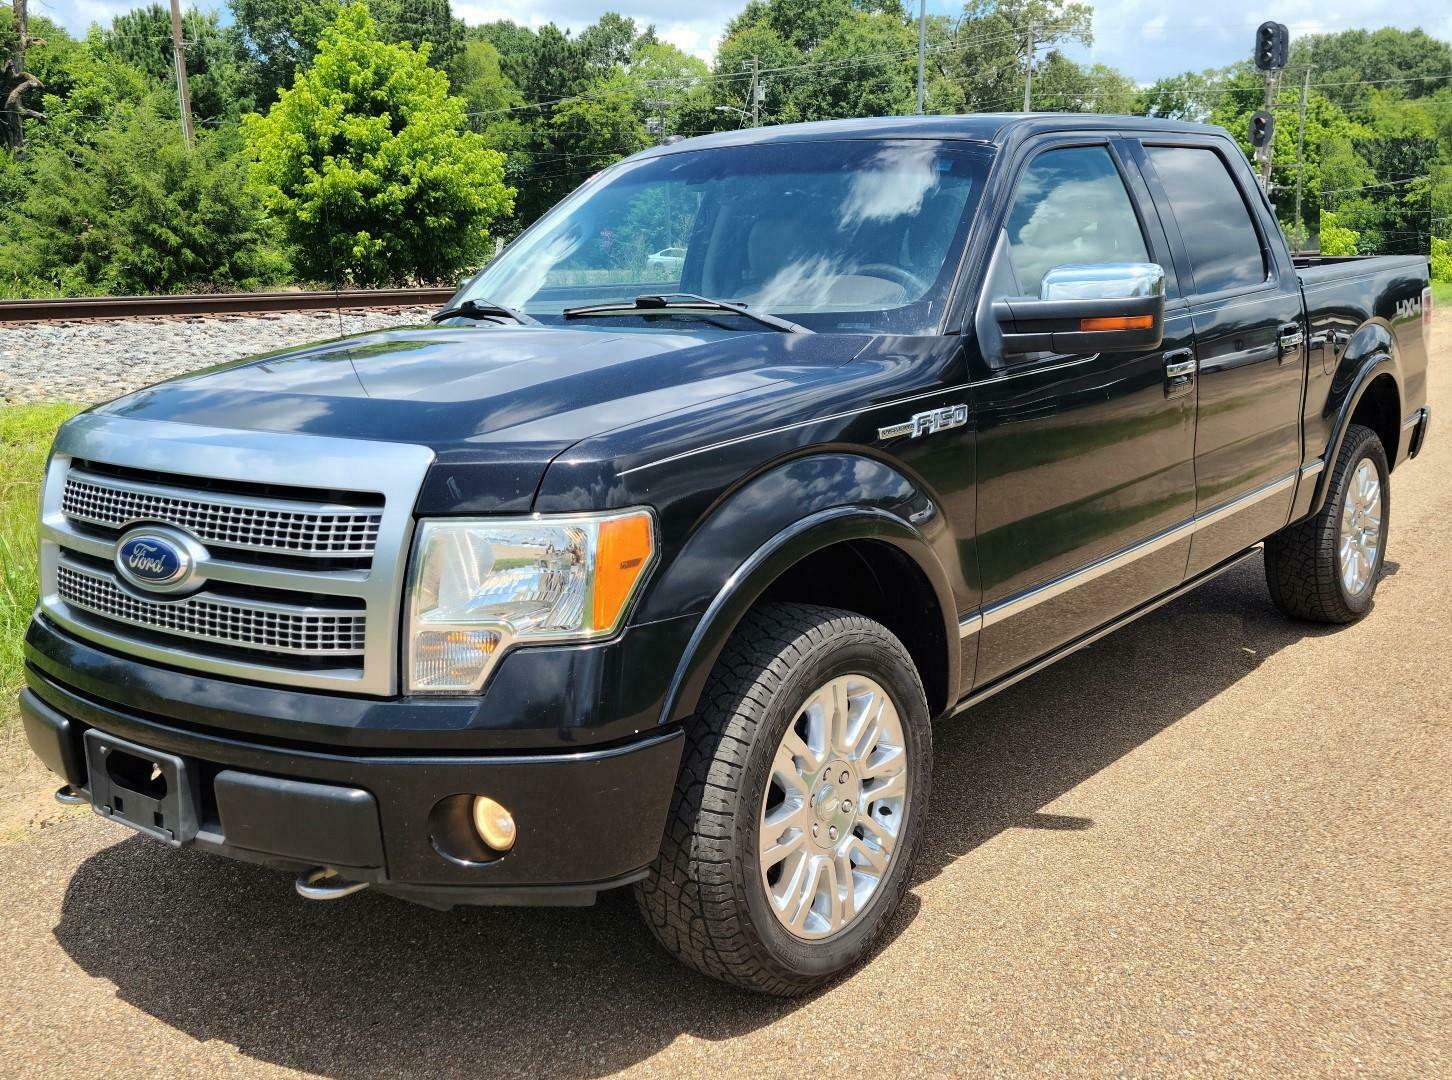 2010 Ford F-150 Platinum Heated/cooled Seats Backup Cam Chrome Pkg Power Pedals/column/folding Mirrors